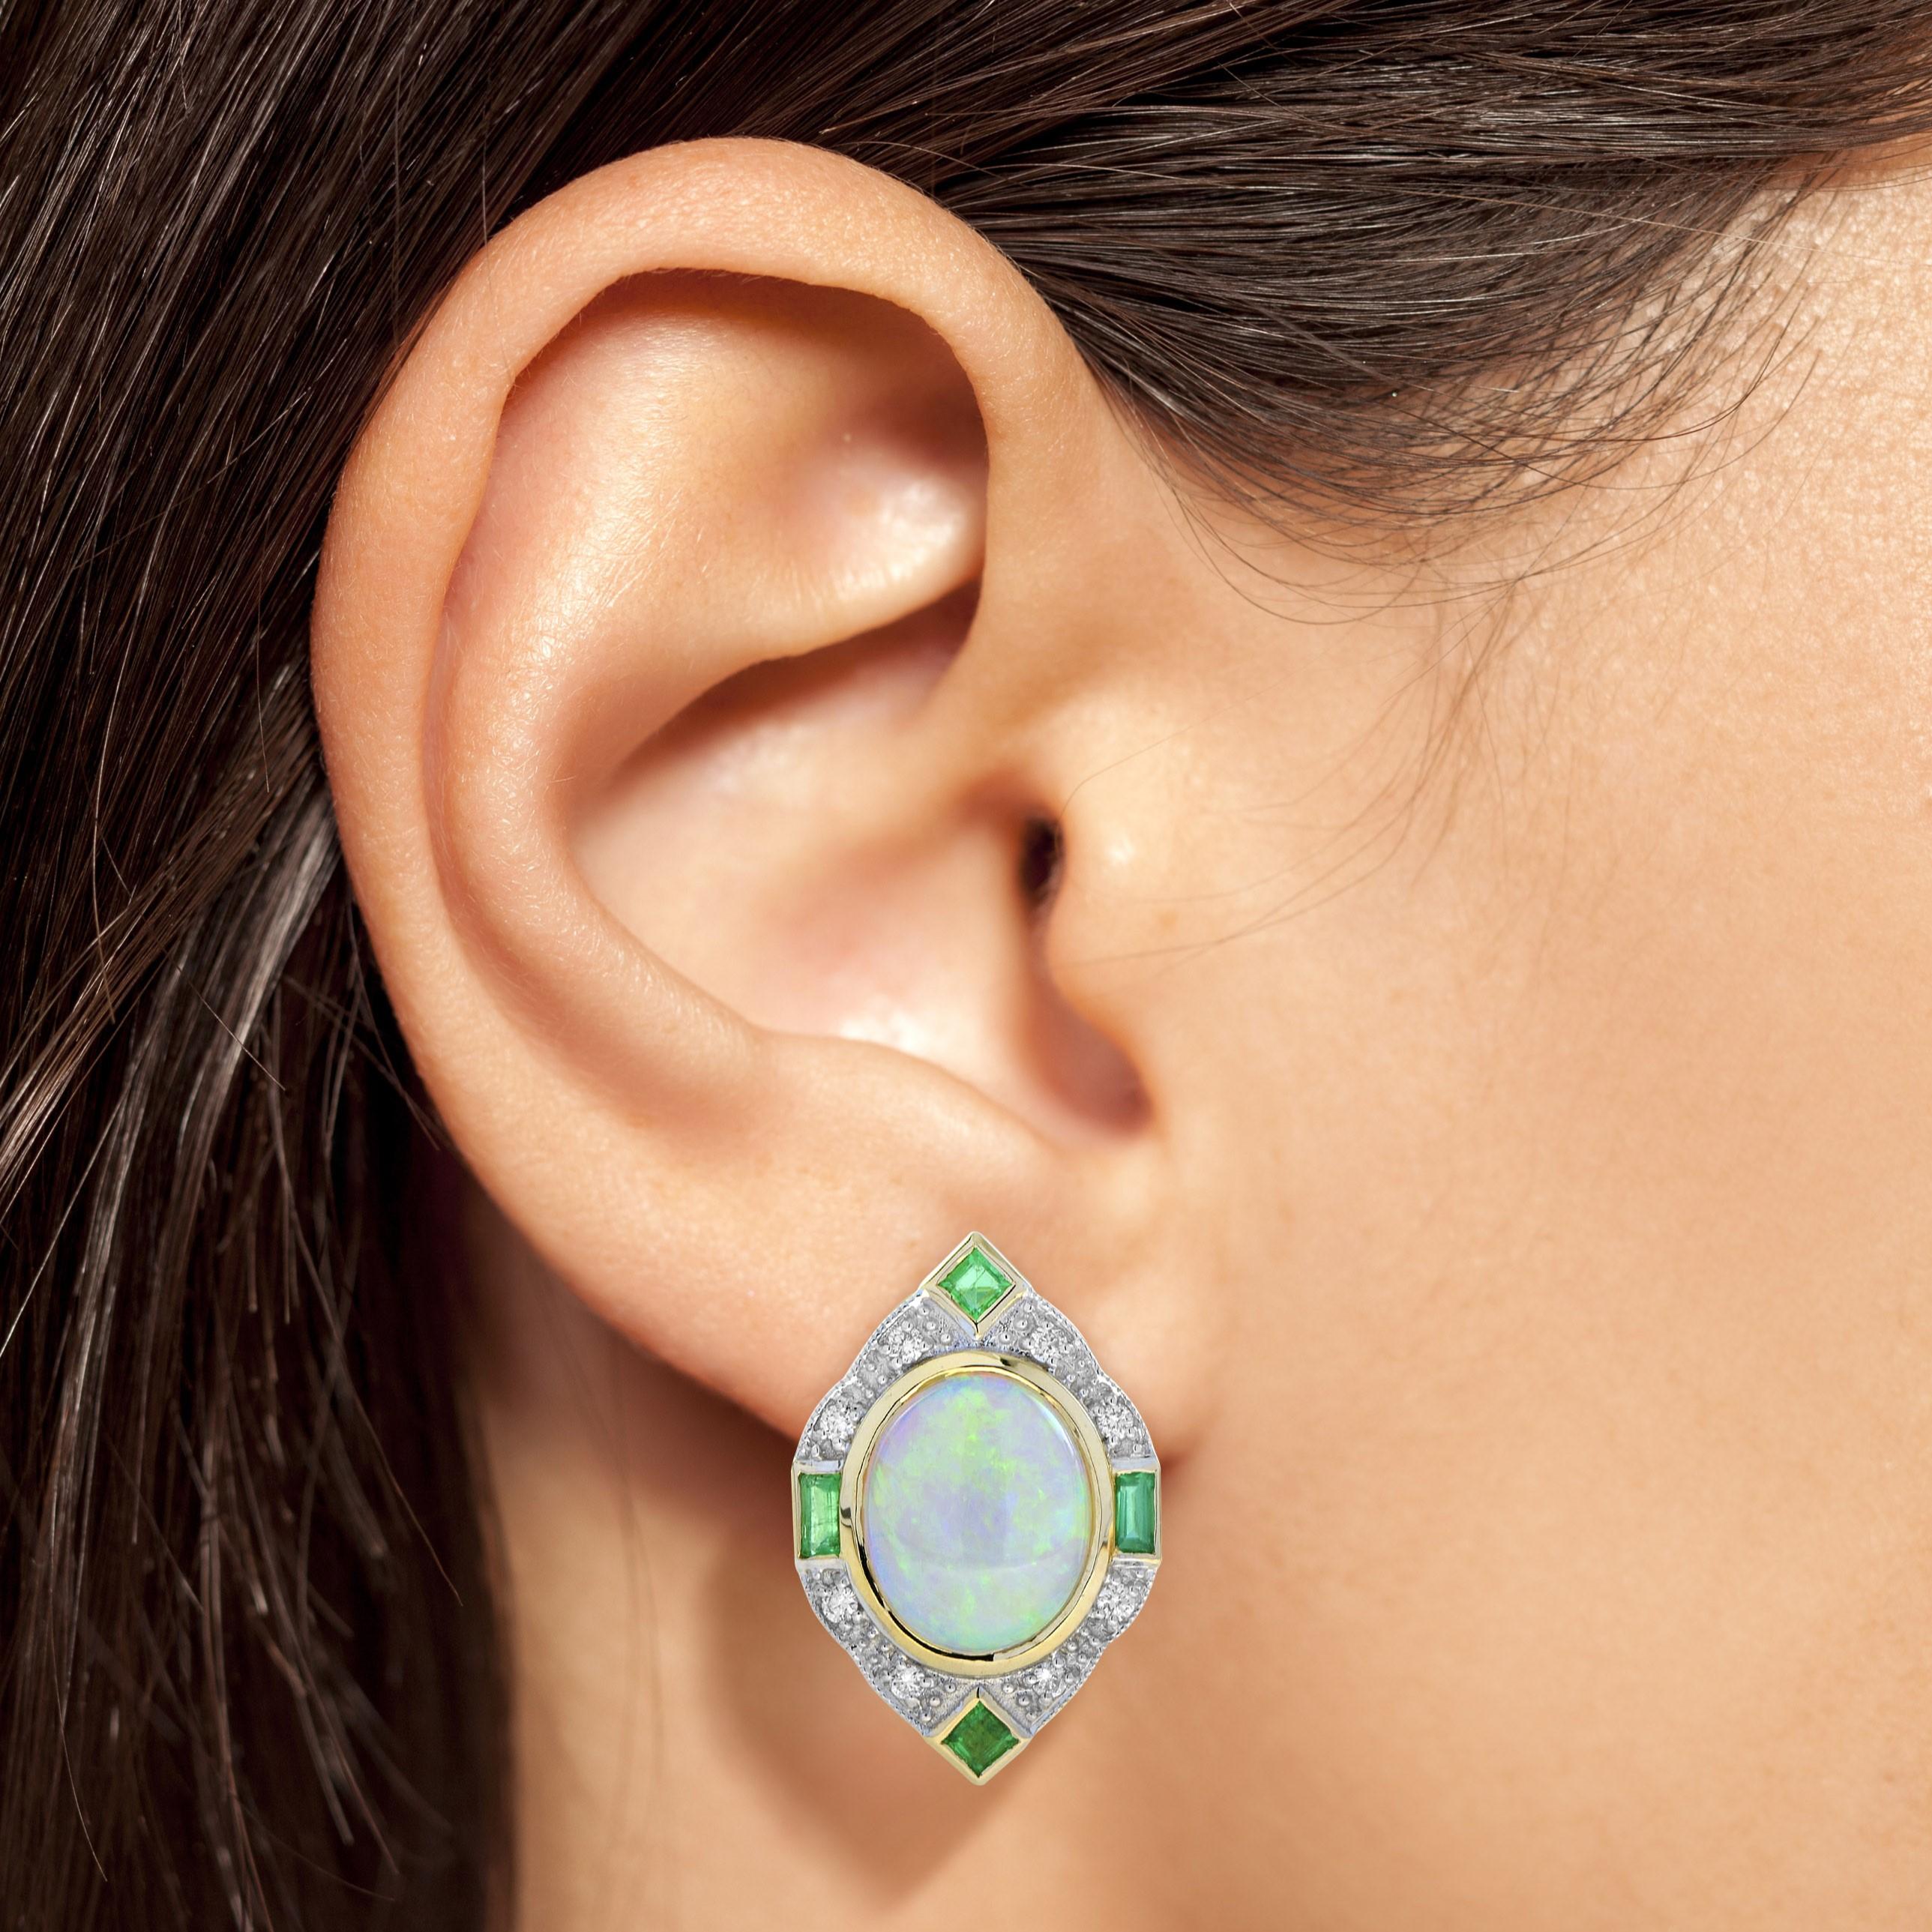 Crafted in 14k yellow gold, this fanciful, Art Deco inspired earrings sees a raised an opulent total of 4.20 carat oval opal surrounded by sparkling round diamonds and emeralds. This charming piece is a winsome adornment perfect to mark a milestone